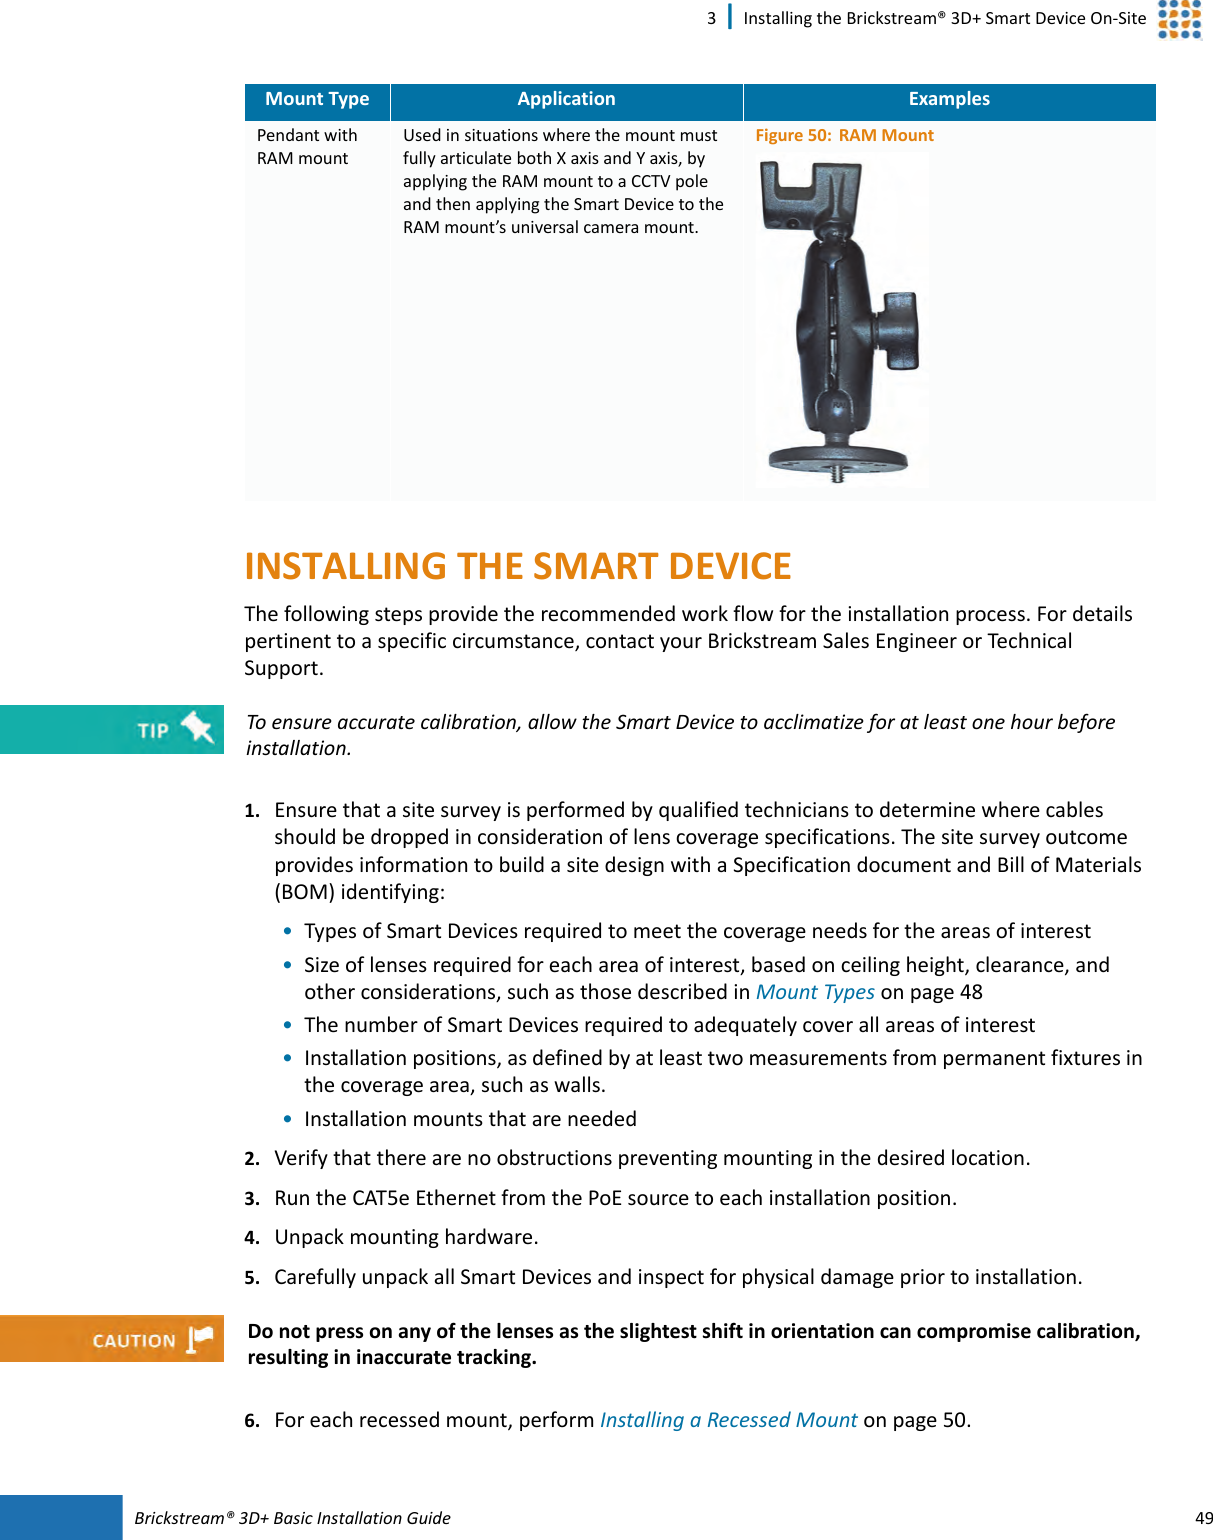 Brickstream®  3D+ Basic Installation Guide 493 | Installing the Brickstream® 3D+ Smart Device On-SiteINSTALLING THE SMART  DEVICEThe following steps provide the recommended work flow for the installation process. For details pertinent to a specific circumstance, contact your Brickstream Sales Engineer or Technical Support.1. Ensure that a site survey is performed by qualified technicians to determine where cables should be dropped in consideration of lens coverage specifications. The site survey outcome provides information to build a site design with a Specification document and Bill of Materials (BOM) identifying:•Types of Smart  Devices required to meet the coverage needs for the areas of interest•Size of lenses required for each area of interest, based on ceiling height, clearance, and other considerations, such as those described in Mount Types on page 48•The number of Smart  Devices required to adequately cover all areas of interest•Installation positions, as defined by at least two measurements from permanent fixtures in the coverage area, such as walls.•Installation mounts that are needed2. Verify that there are no obstructions preventing mounting in the desired location.3. Run the CAT5e Ethernet from the PoE source to each installation position. 4. Unpack mounting hardware.5. Carefully unpack all Smart  Devices and inspect for physical damage prior to installation.6. For each recessed mount, perform Installing a Recessed Mount on page 50.Pendant with RAM mountUsed in situations where the mount must fully articulate both X axis and Y axis, by applying the RAM mount to a CCTV pole and then applying the Smart  Device to the RAM mount’s universal camera mount.Figure 50: RAM MountMount Type Application ExamplesTo ensure accurate calibration, allow the Smart  Device to acclimatize for at least one hour before installation.Do not press on any of the lenses as the slightest shift in orientation can compromise calibration, resulting in inaccurate tracking.